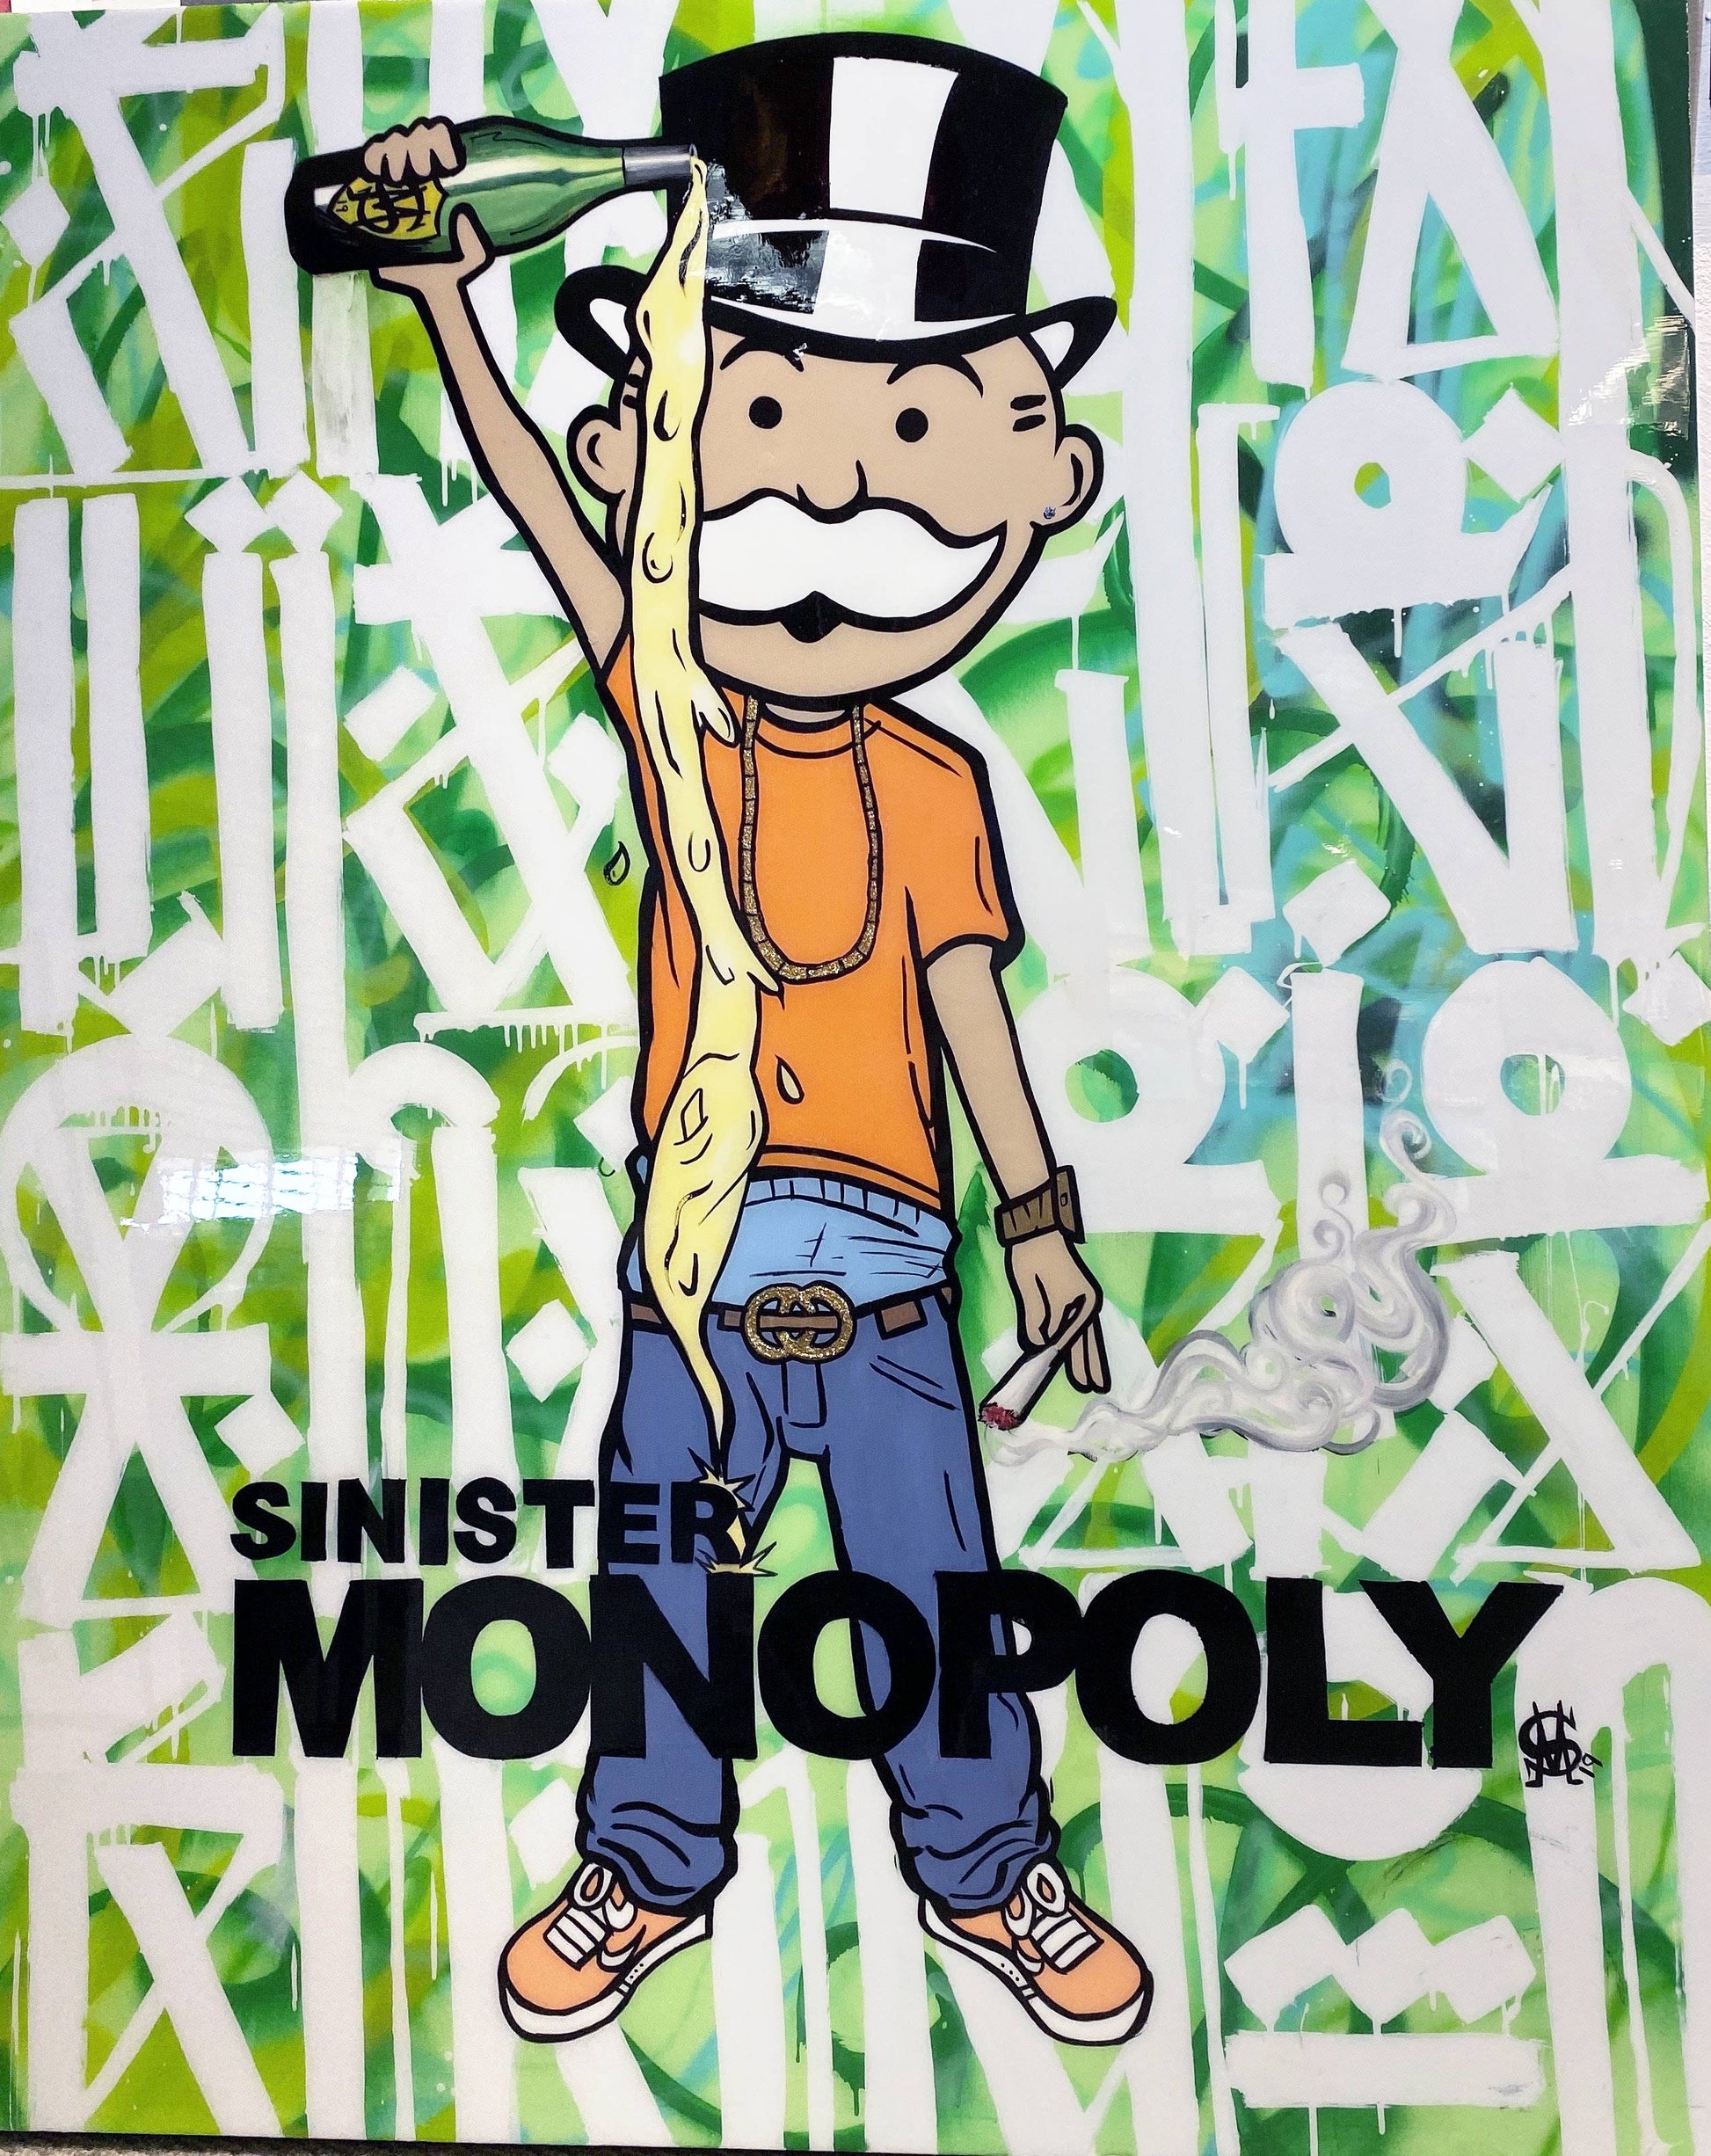 Sinister Monopoly “Pour Something Out” Original on Wood